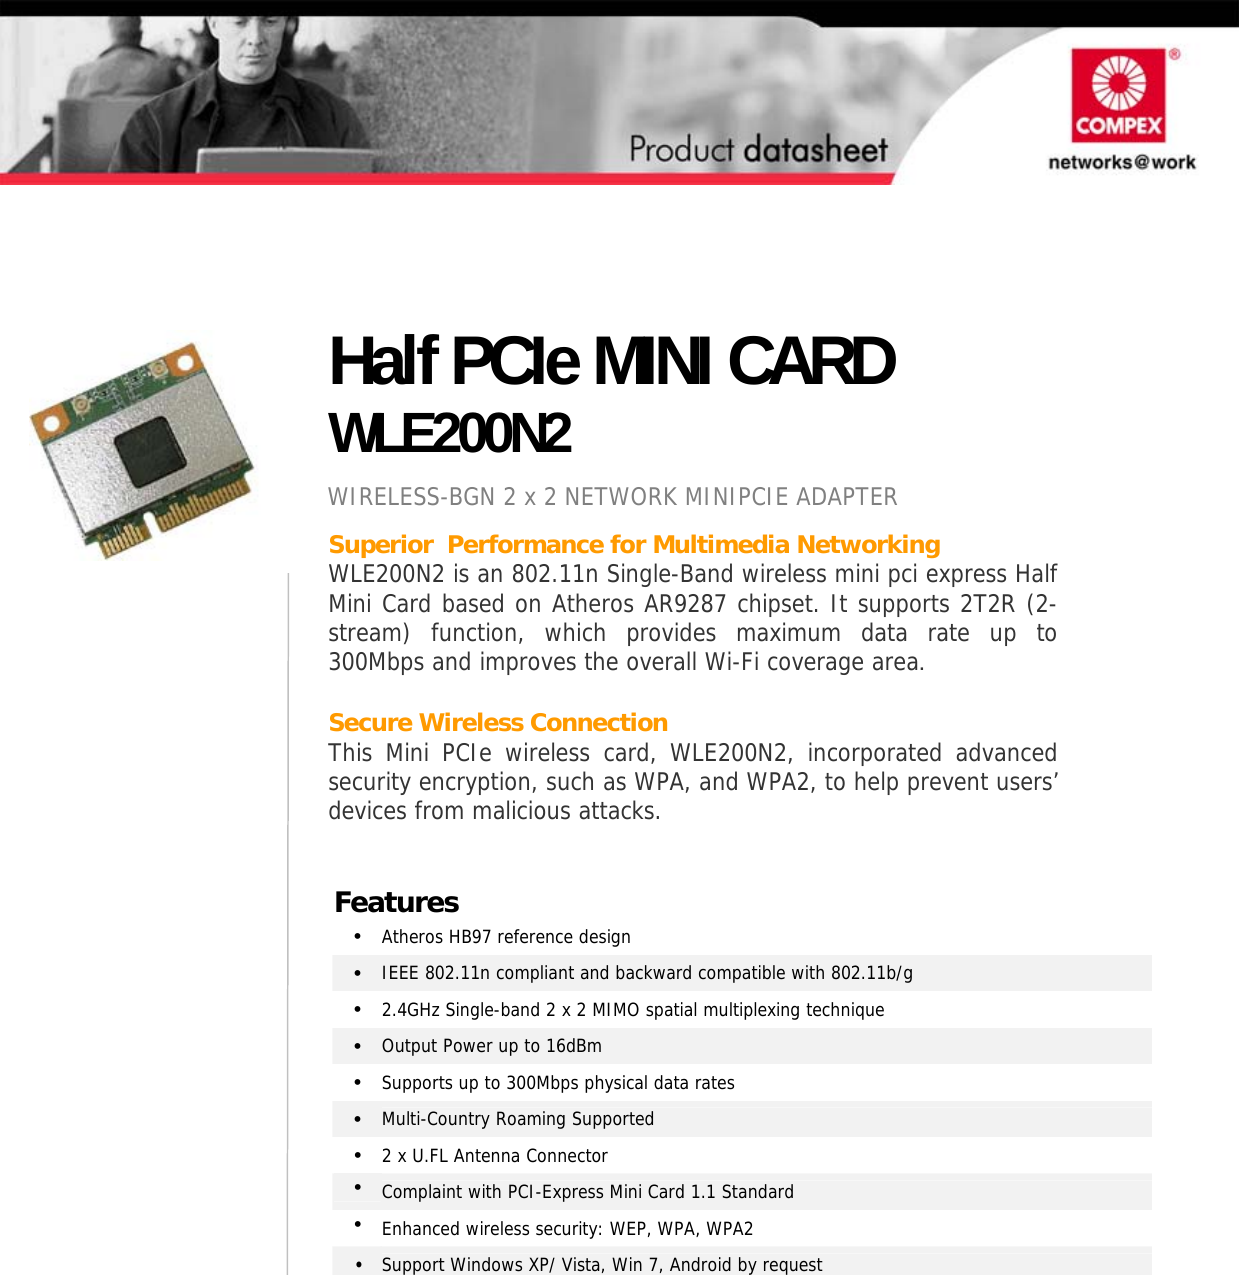                      Superior  Performance for Multimedia Networking WLE200N2 is an 802.11n Single-Band wireless mini pci express Half Mini Card based on Atheros AR9287 chipset. It supports 2T2R (2-stream) function, which provides maximum data rate up to 300Mbps and improves the overall Wi-Fi coverage area.  Secure Wireless Connection This Mini PCIe wireless card, WLE200N2, incorporated advanced security encryption, such as WPA, and WPA2, to help prevent users’ devices from malicious attacks.                   Half PCIe MINI CARD WLE200N2 WIRELESS-BGN 2 x 2 NETWORK MINIPCIE ADAPTER Features •  Atheros HB97 reference design •  IEEE 802.11n compliant and backward compatible with 802.11b/g •  2.4GHz Single-band 2 x 2 MIMO spatial multiplexing technique •  Output Power up to 16dBm •  Supports up to 300Mbps physical data rates •  Multi-Country Roaming Supported  •  2 x U.FL Antenna Connector  •  Complaint with PCI-Express Mini Card 1.1 Standard •  Enhanced wireless security: WEP, WPA, WPA2 •  Support Windows XP/ Vista, Win 7, Android by request   